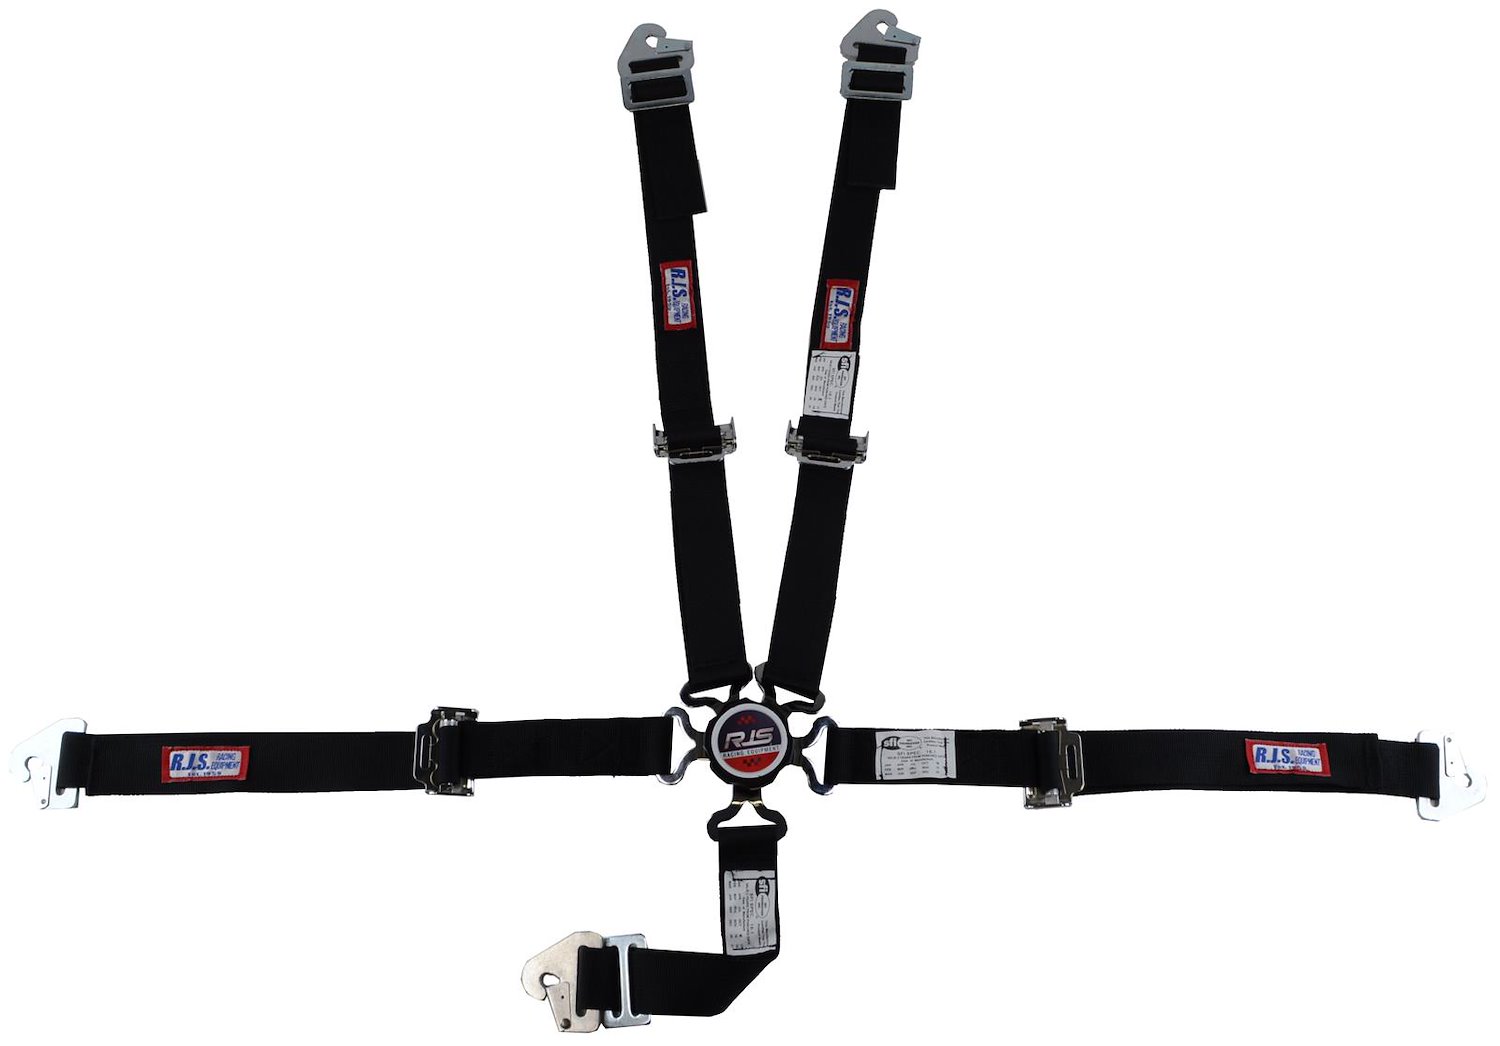 SFI 16.1 CAM-LOCK HARNESS 2 PULL UP Lap Belt 2 Shoulder Harness V ROLL BAR Mount 2 DOUBLE Sub ALL WRAP/BOLT ENDS YELLOW